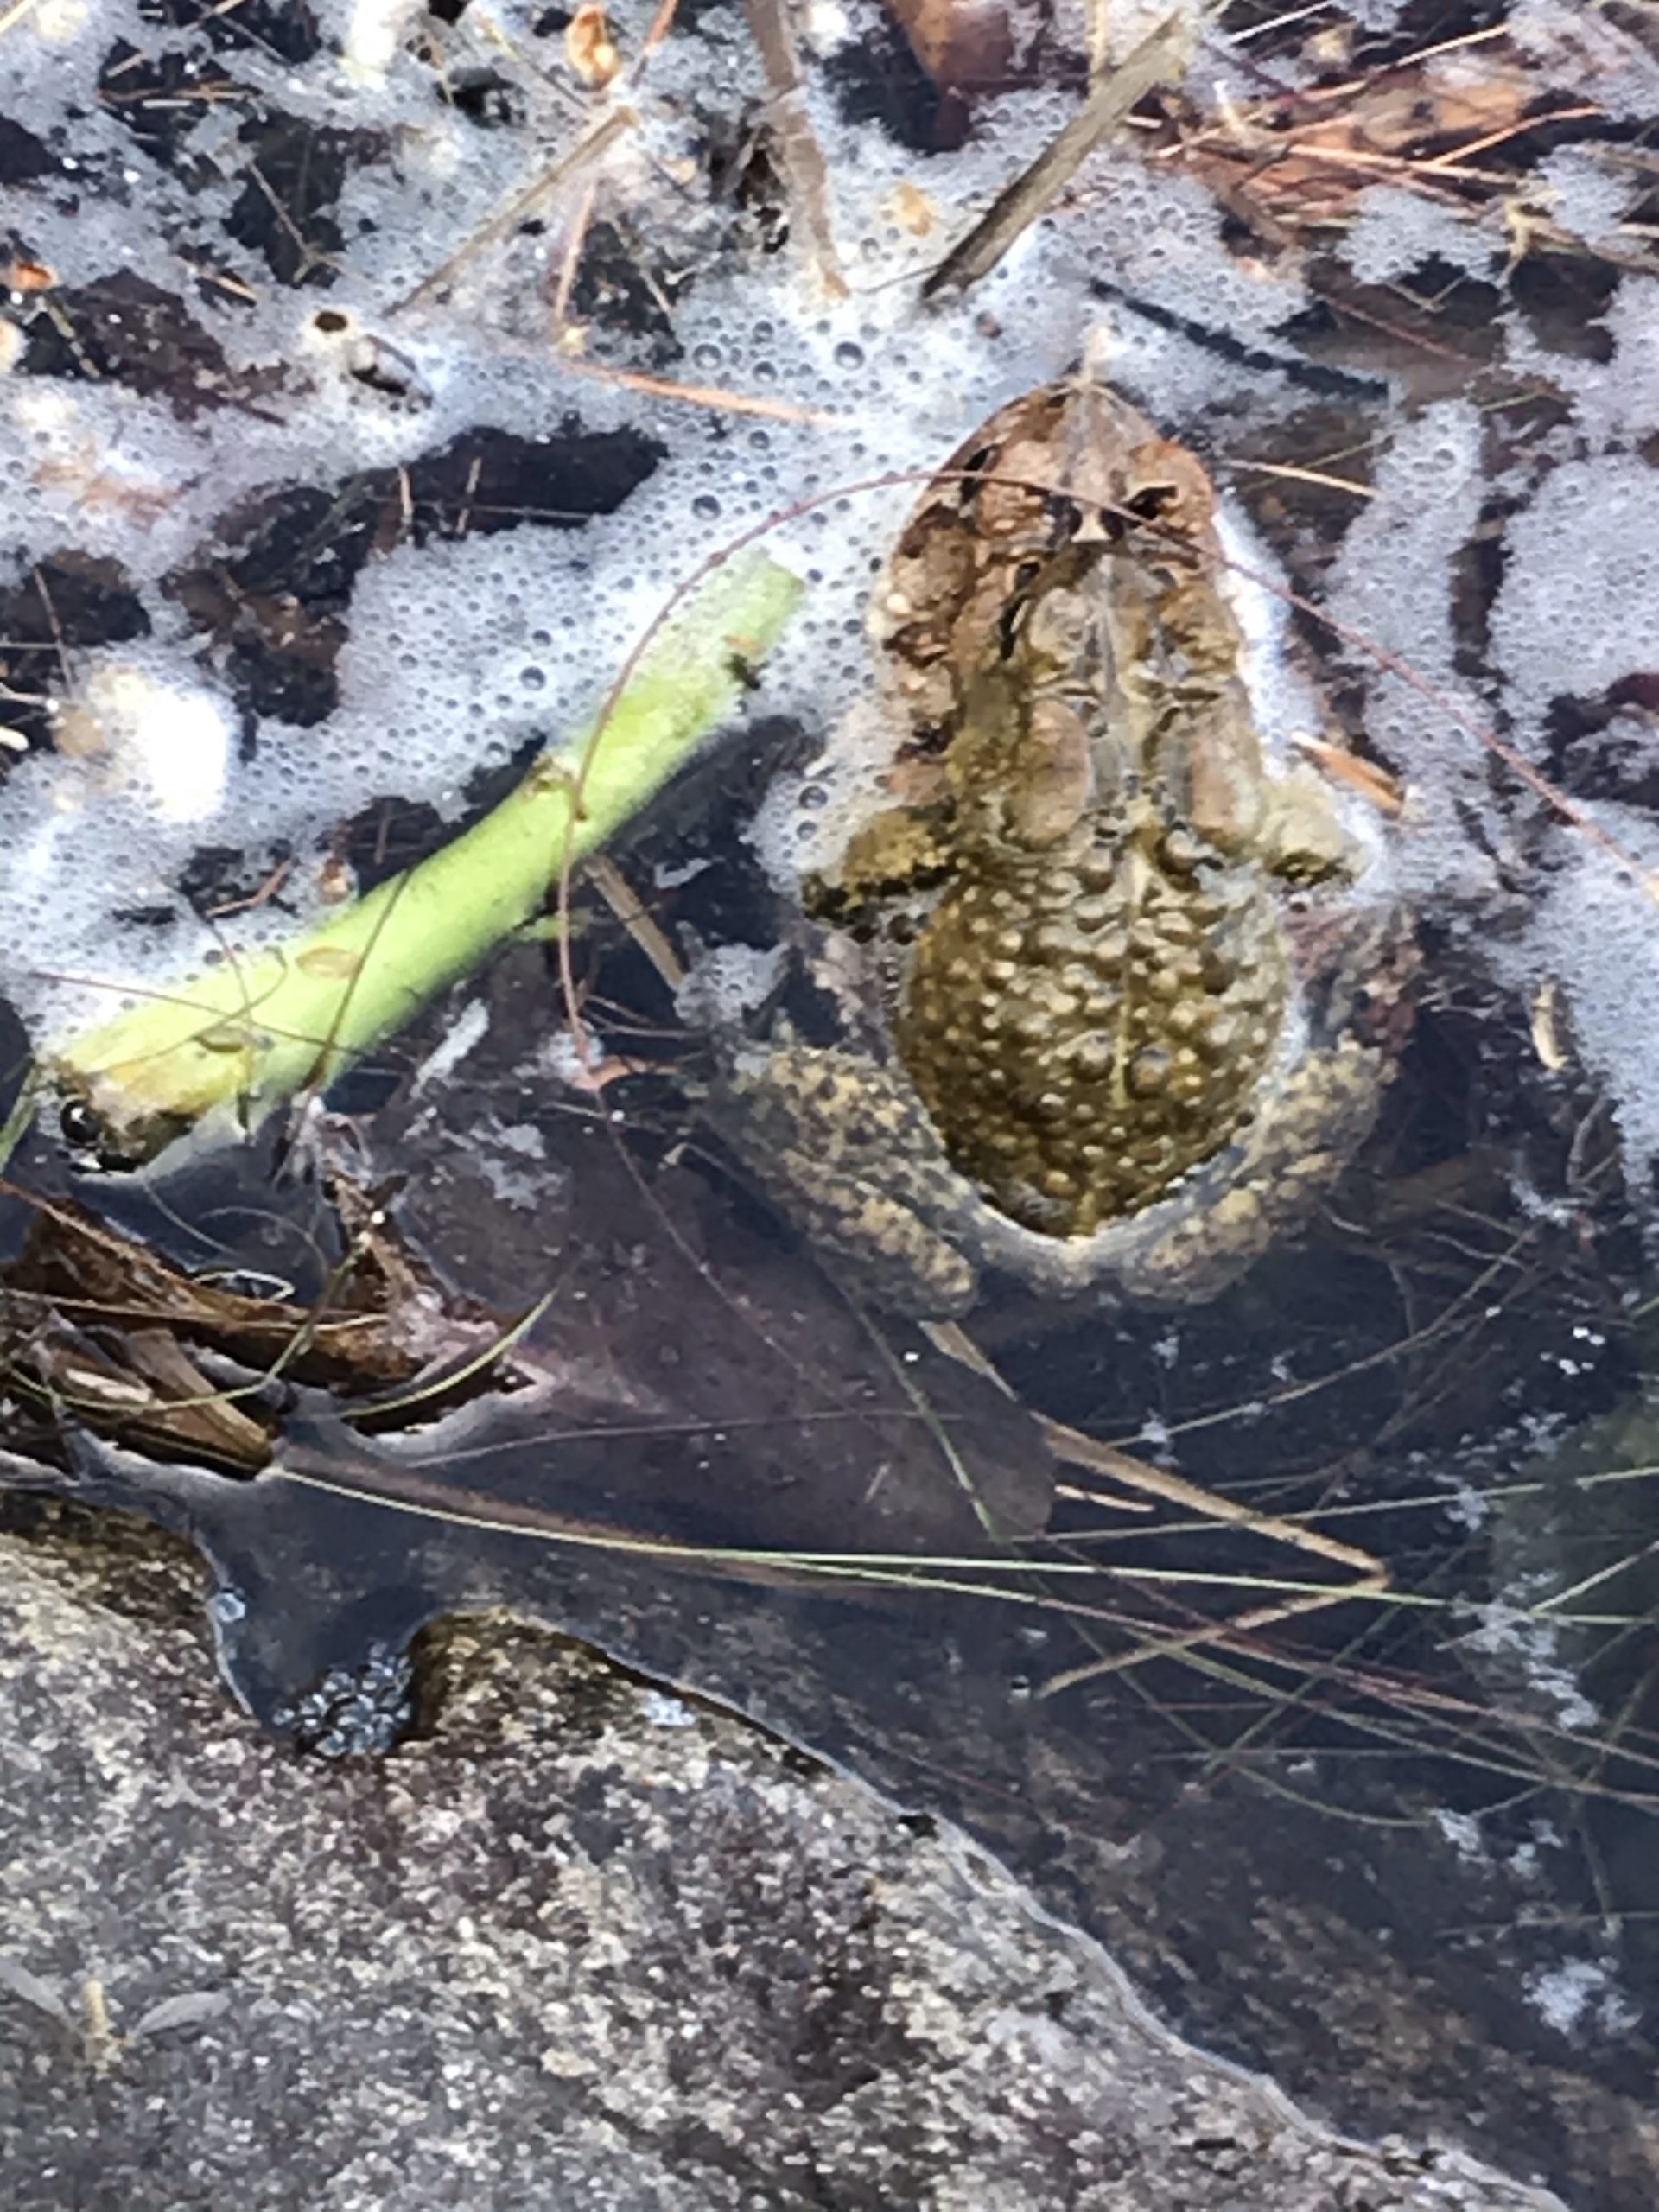 Some toads in Breakhart pond-very loud! In Arcadia Management Area